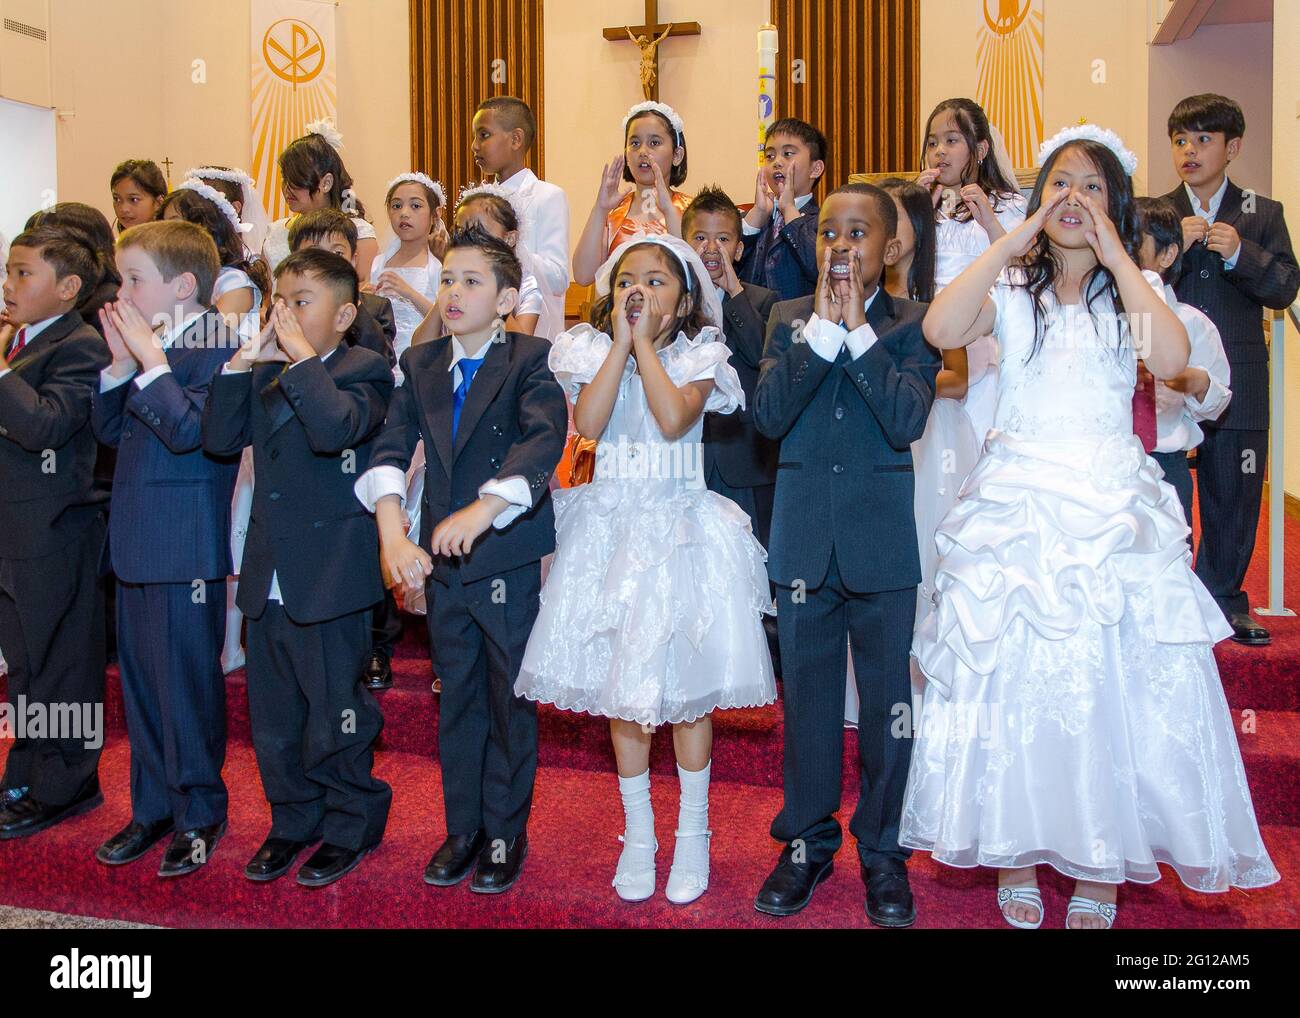 Children in their Sunday best,singing in religious choir at a Catholic church.  Three rows of children stand at the altar of a church in dark suits an Stock Photo